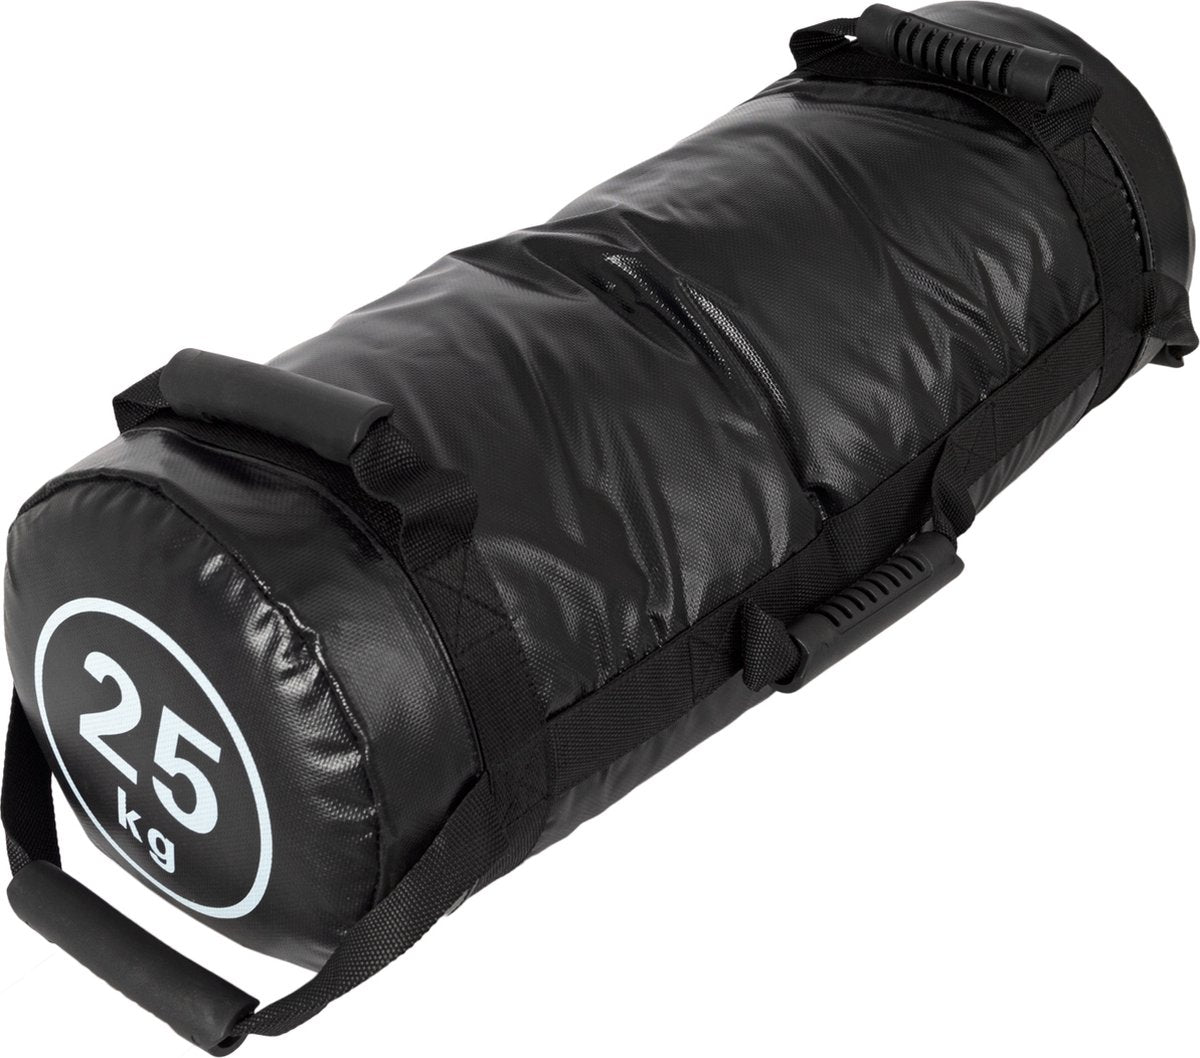 SOUTHWALL Fitness powerbag 25kg